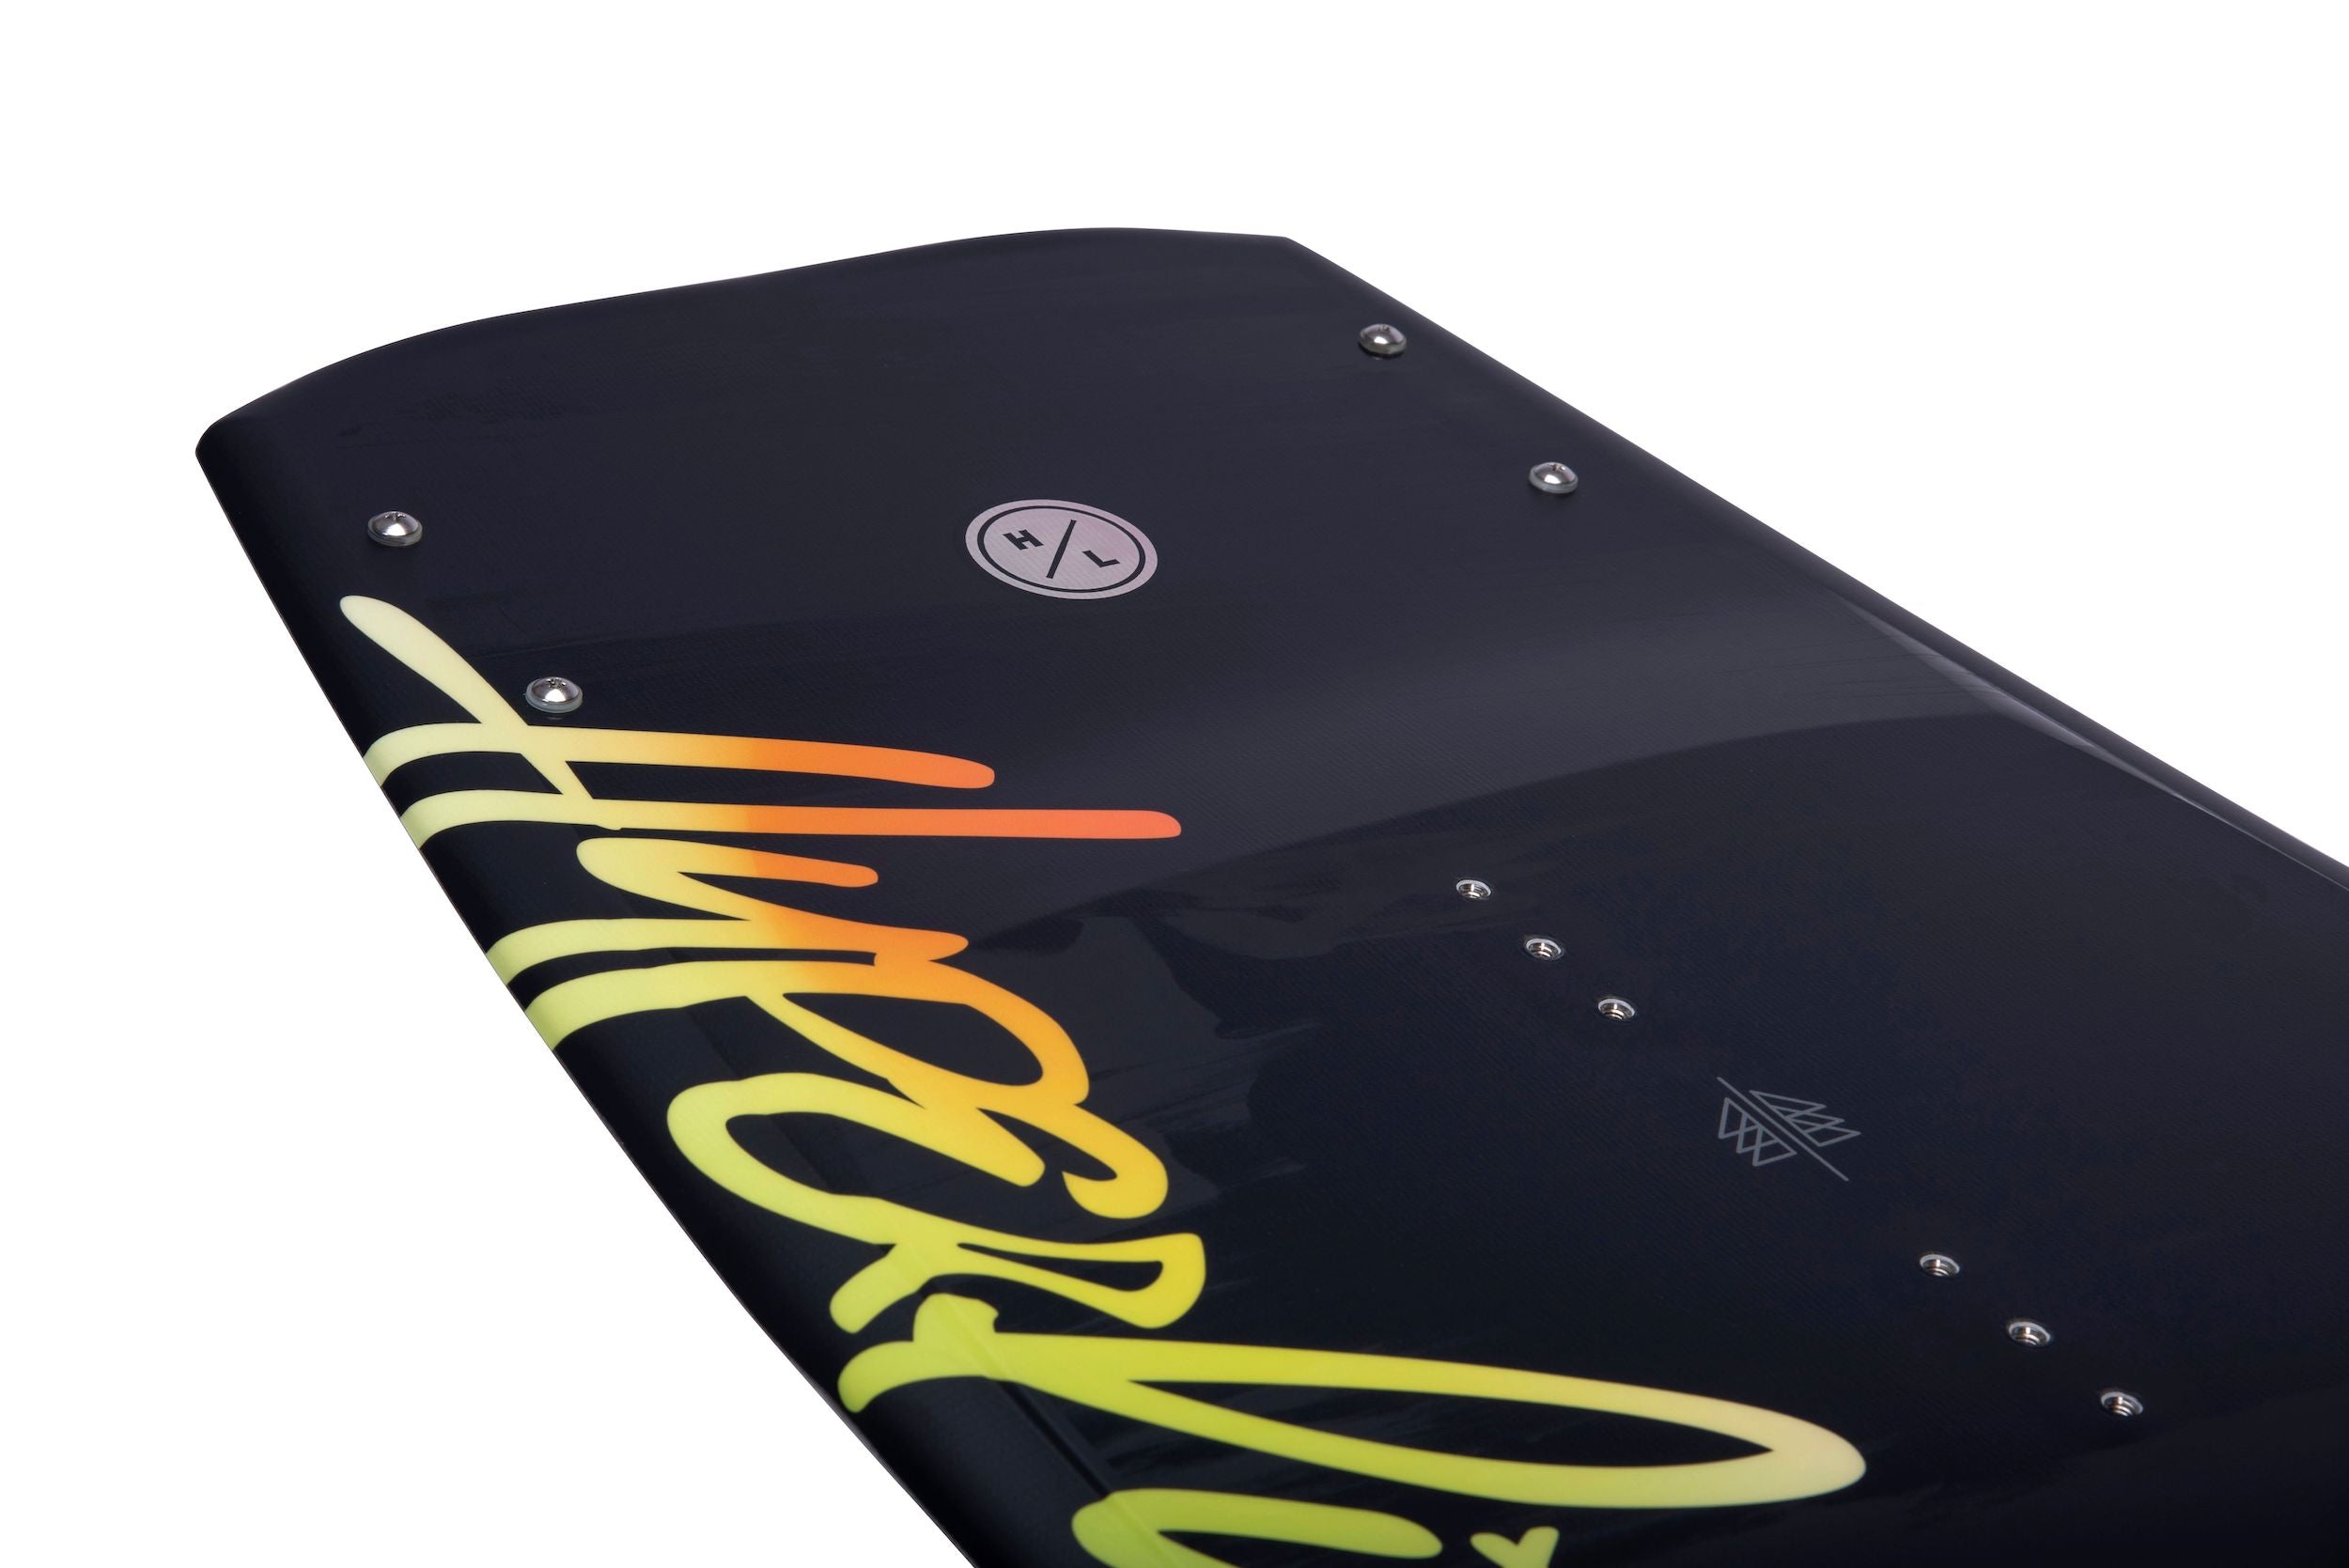 The back of a black and yellow Hyperlite 2023 Cadence wakeboard from Hyperlite's Cadence series, featuring the signature of Bec Gange.